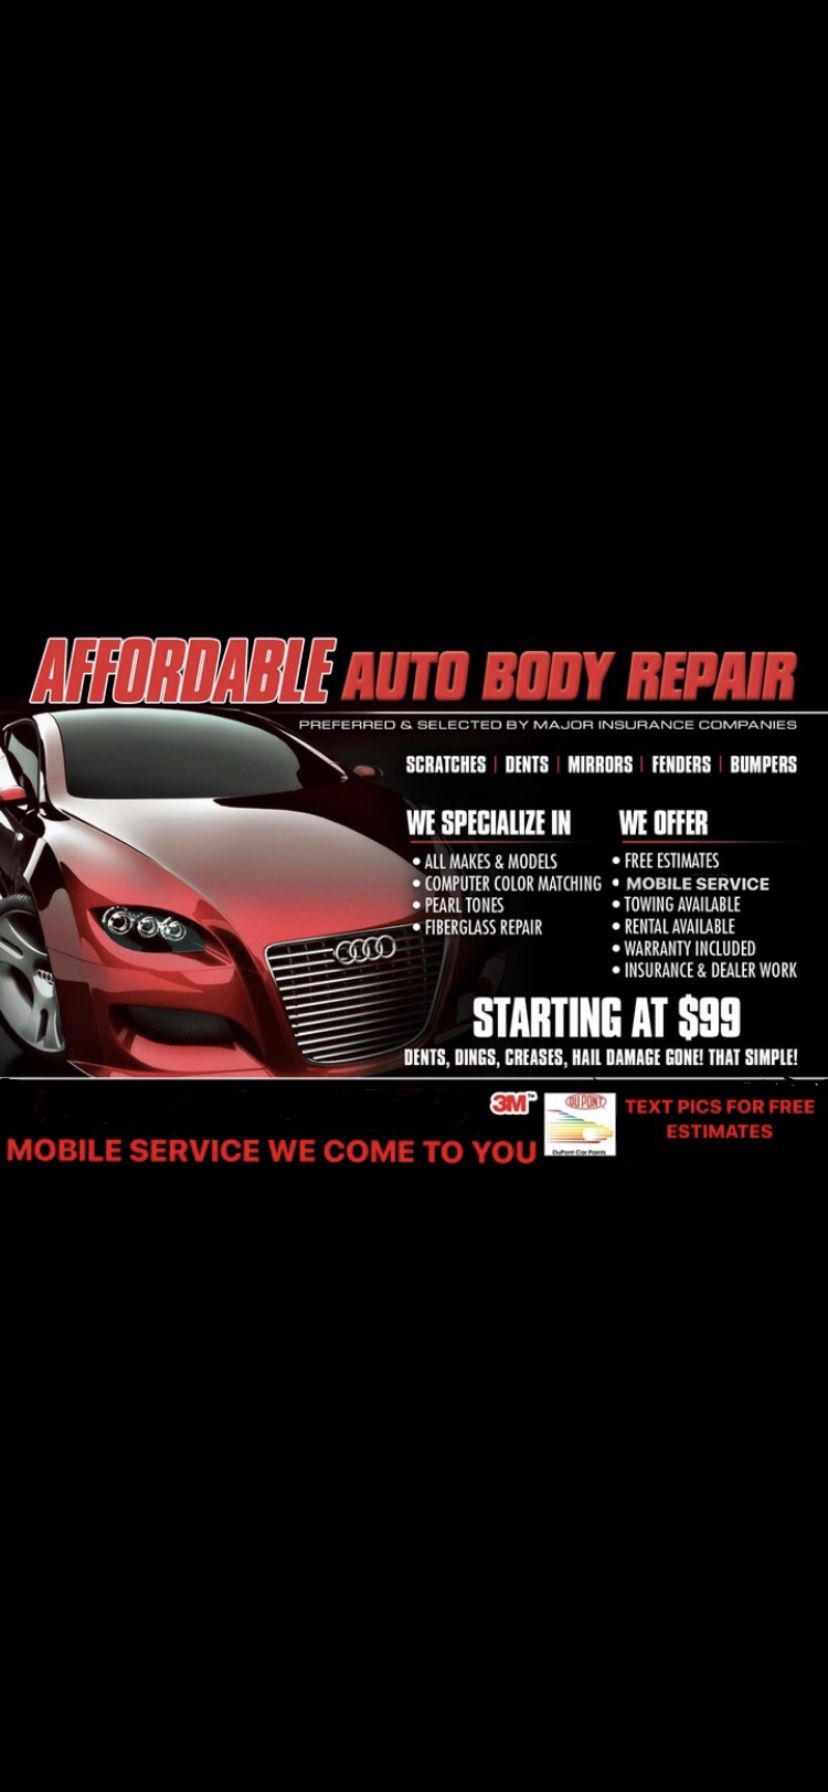 Auto body parts and paint